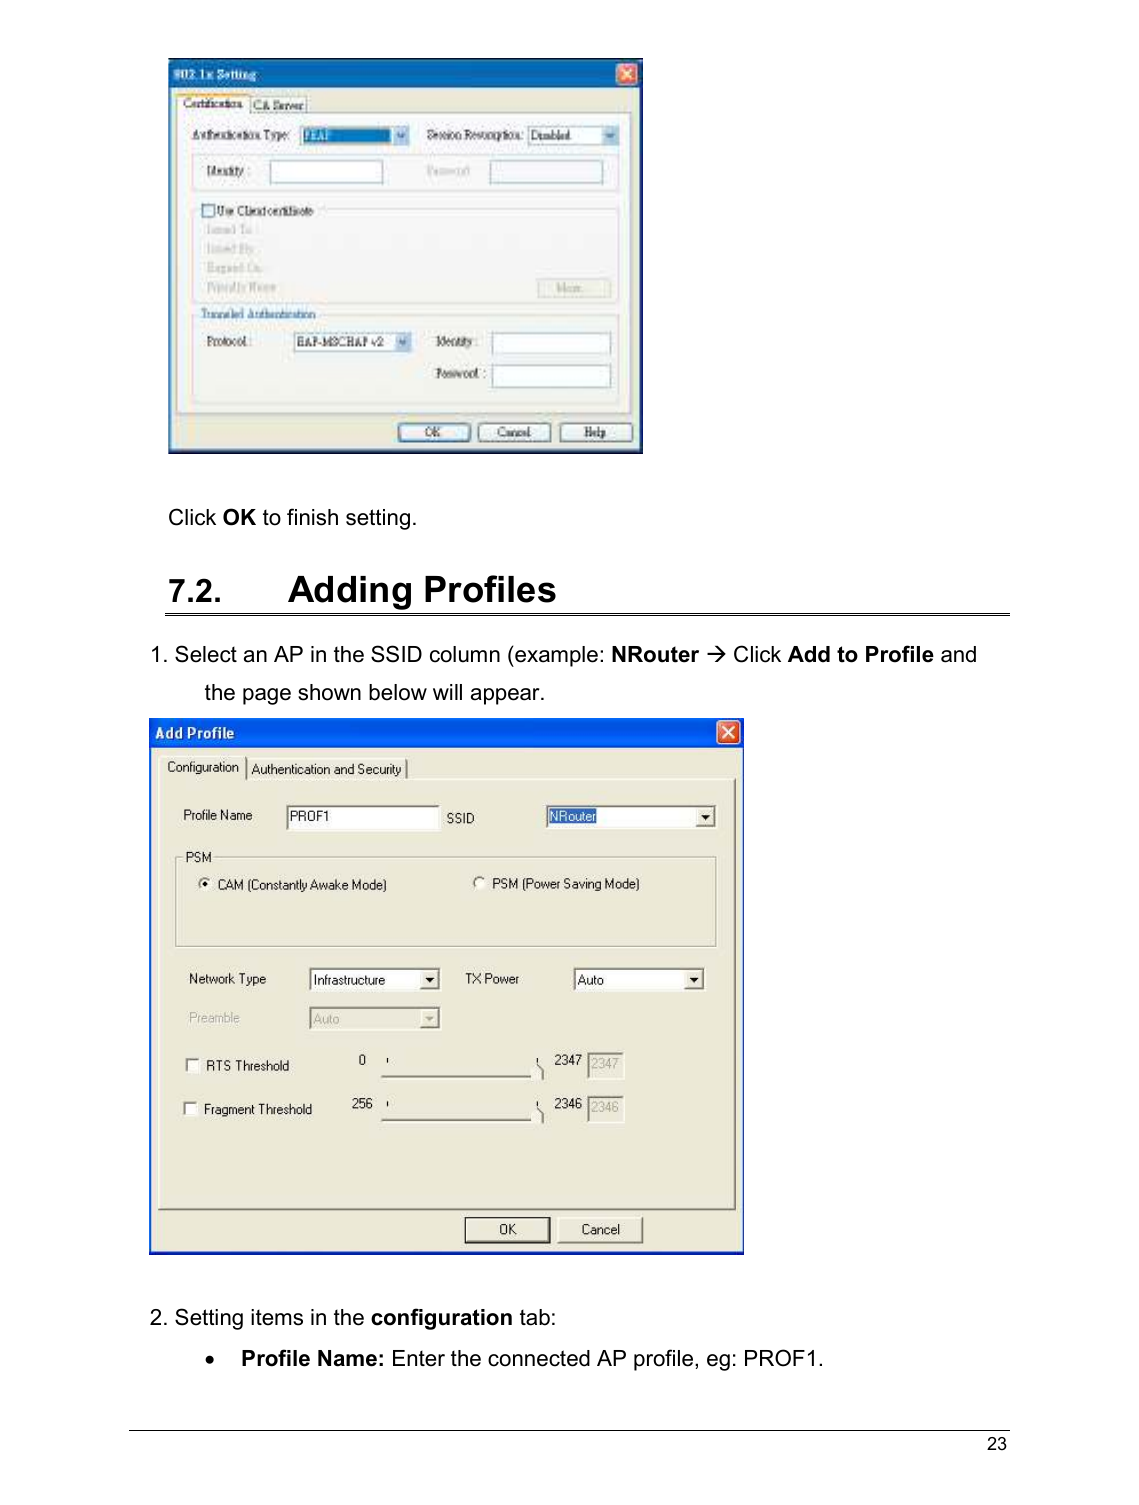   23                                                    Click OK to finish setting.  7.2.  Adding Profiles  1. Select an AP in the SSID column (example: NRouter  Click Add to Profile and the page shown below will appear.   2. Setting items in the configuration tab: • Profile Name: Enter the connected AP profile, eg: PROF1. 